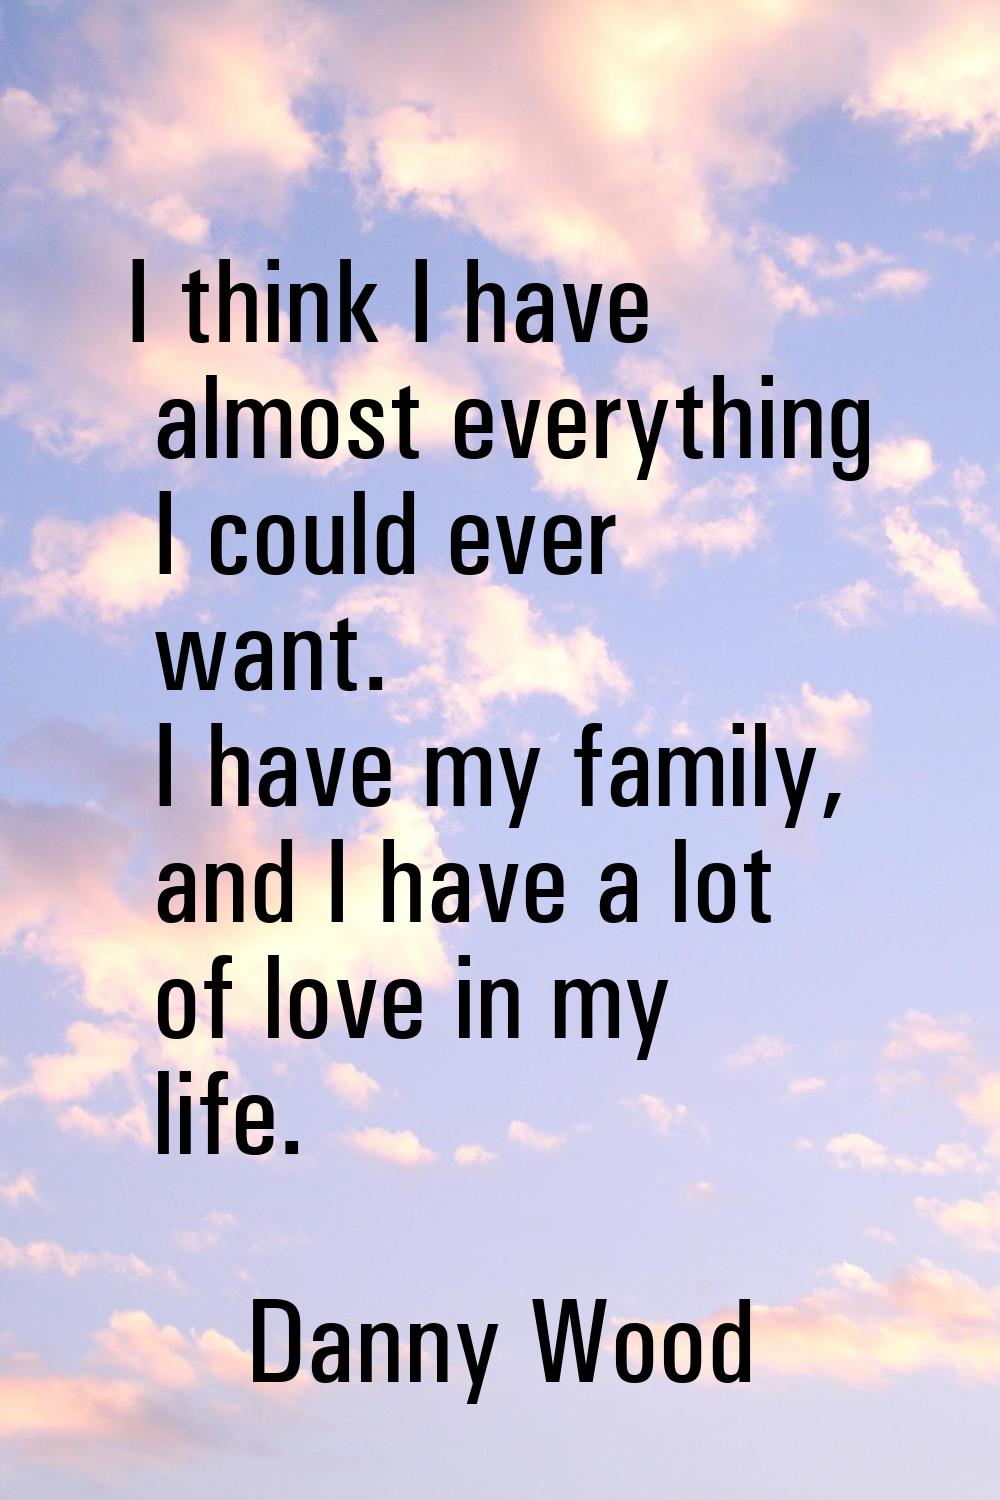 I think I have almost everything I could ever want. I have my family, and I have a lot of love in m